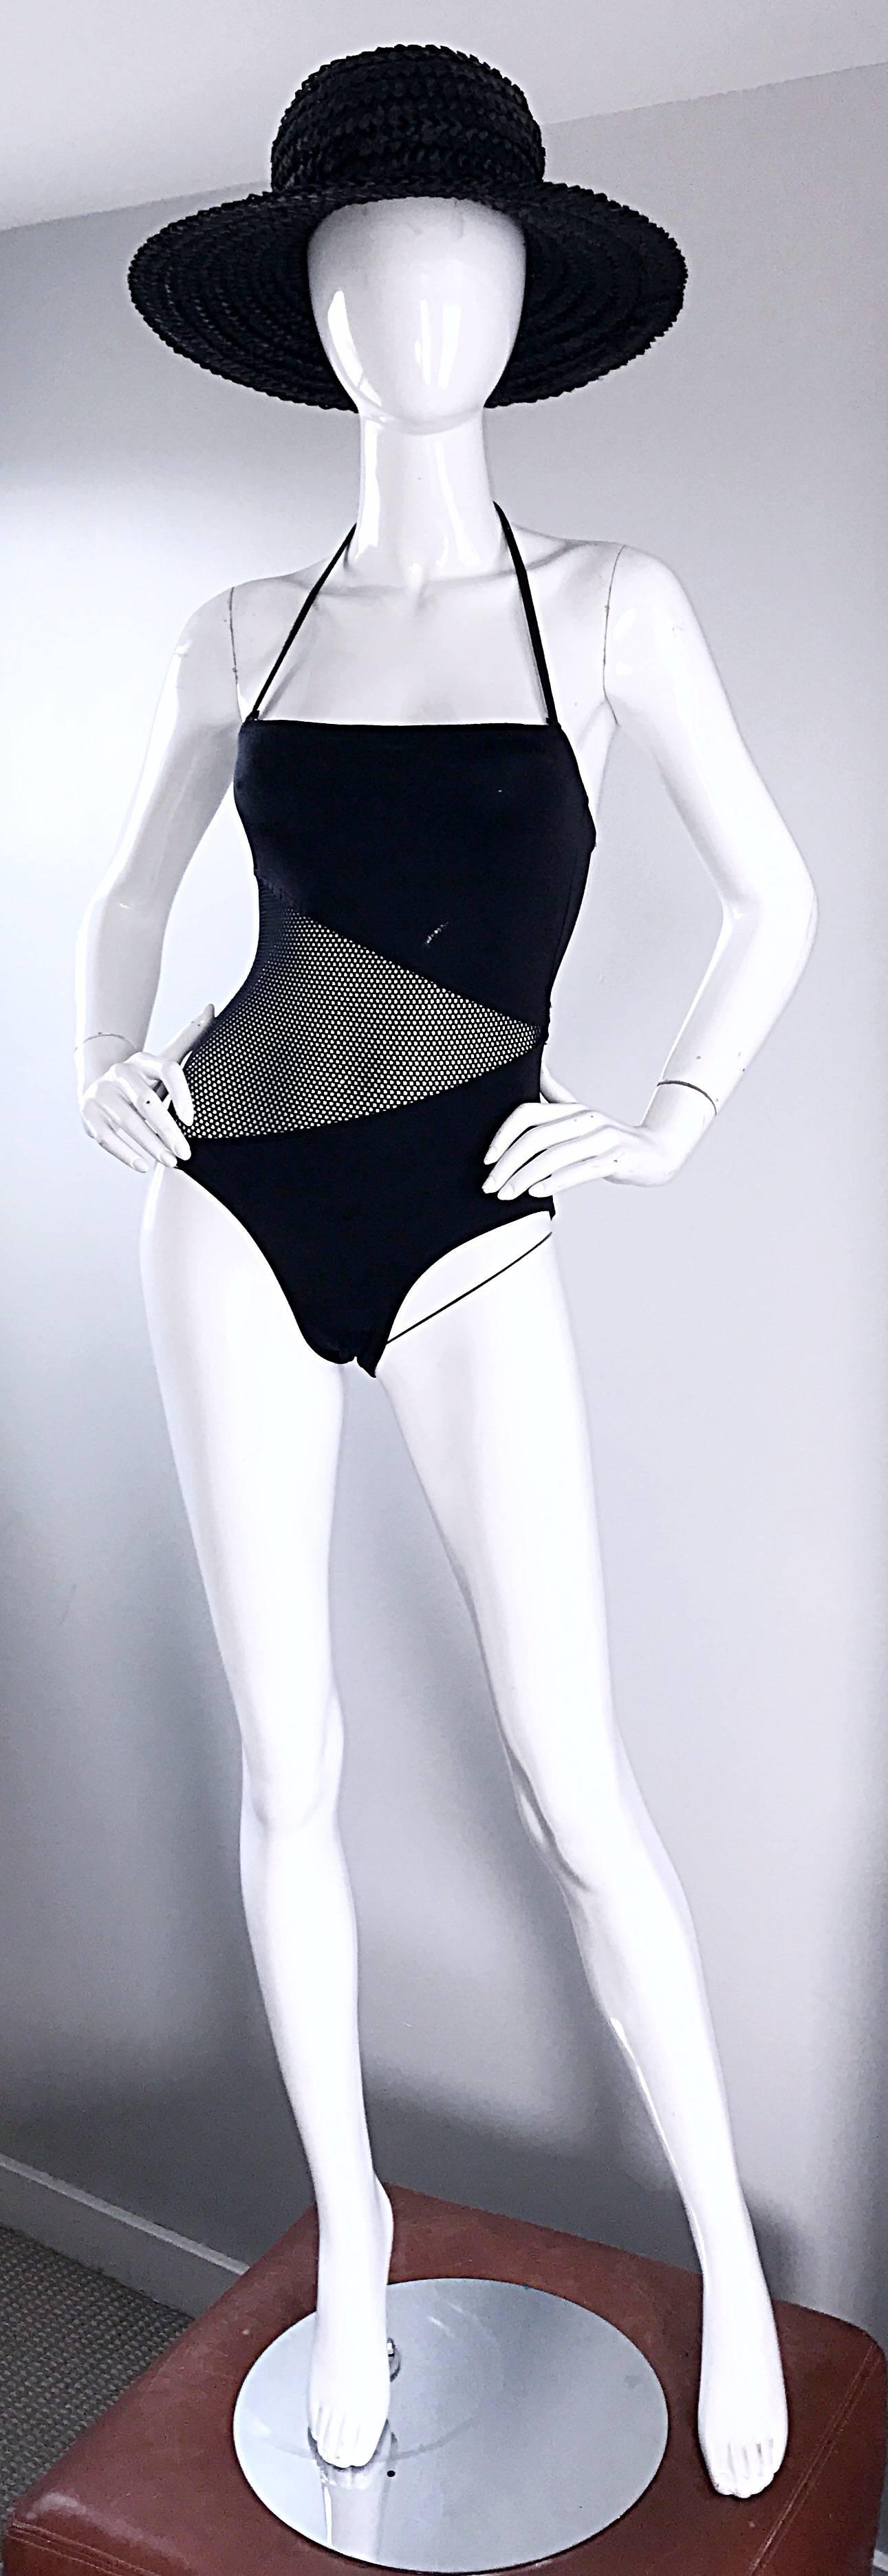 Sexy vintage BILL BLASS black mesh cut-out one piece swimsuit or bodysuit! Features a convertible strap, which means you can wear it as a halter, or strapless! Cut-out mesh detail on the front and back. Looks amazing on! Great for swimwear, or